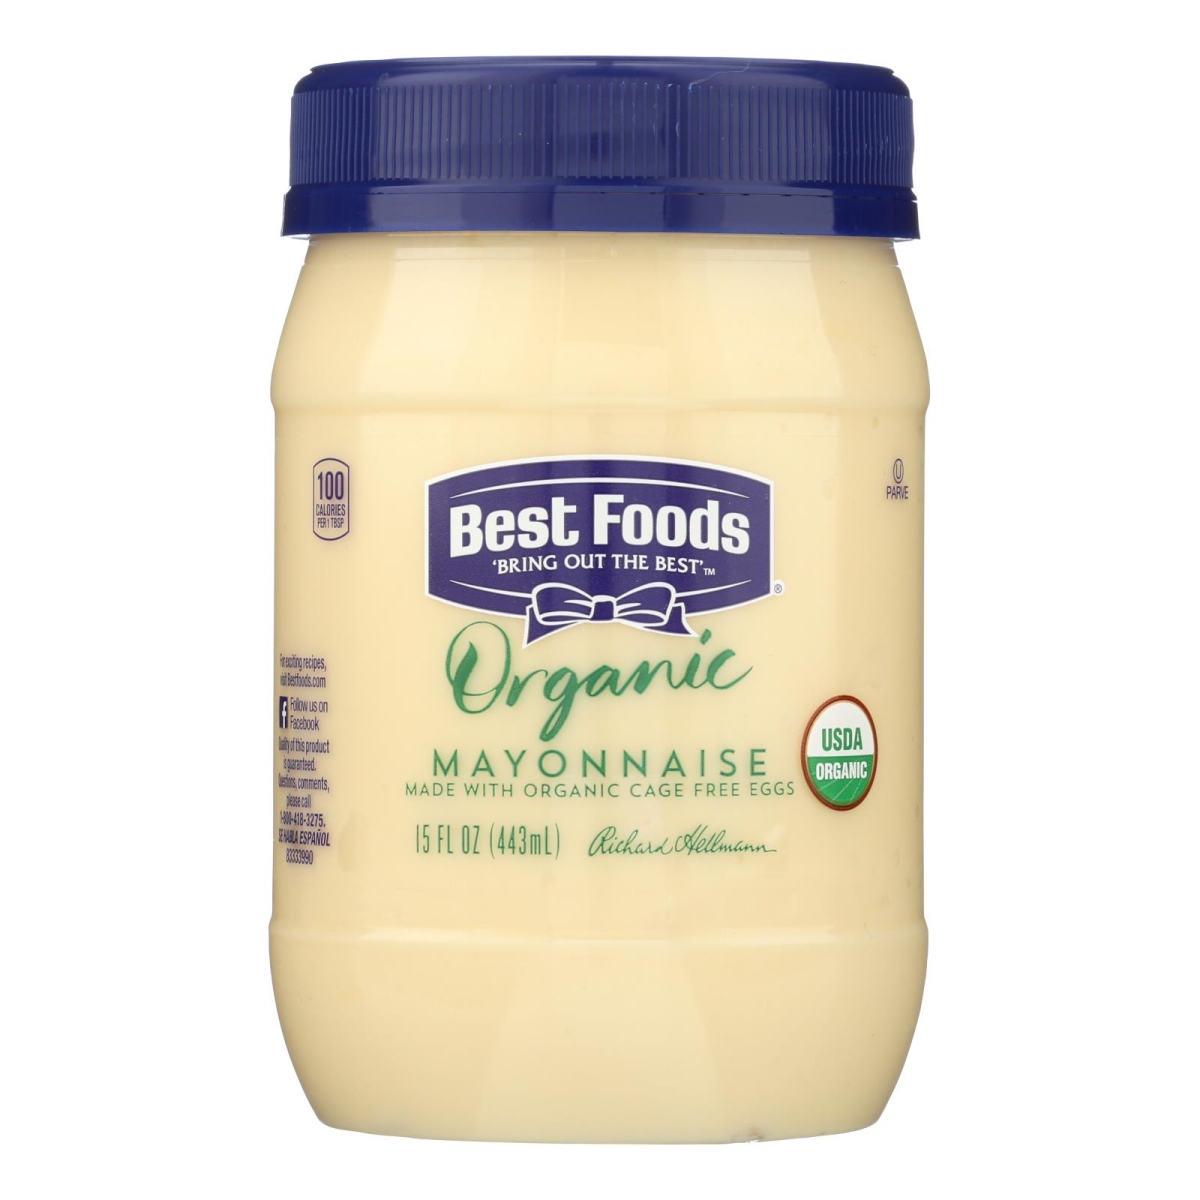 Picture of Best Foods 1974591 15 oz Original Organic Mayonnaise